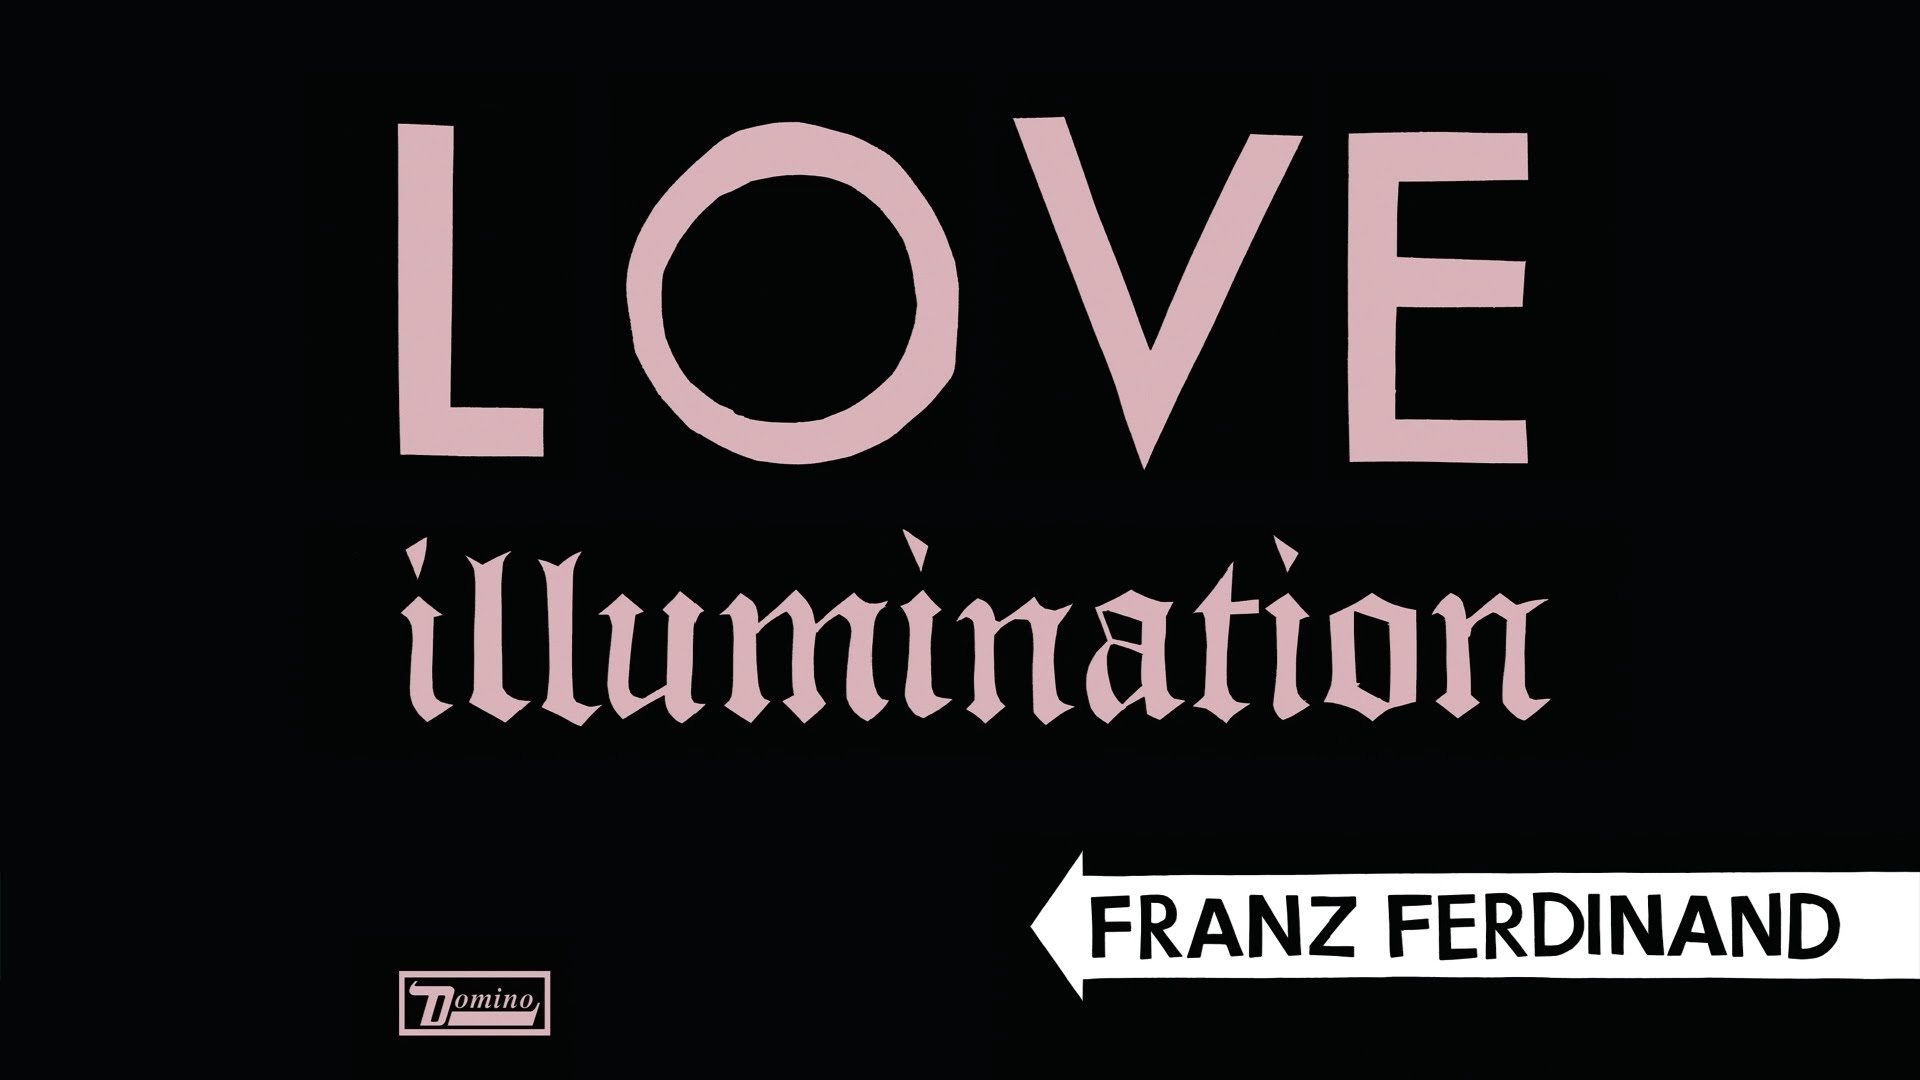 Listen to two new Franz Ferdinand songs